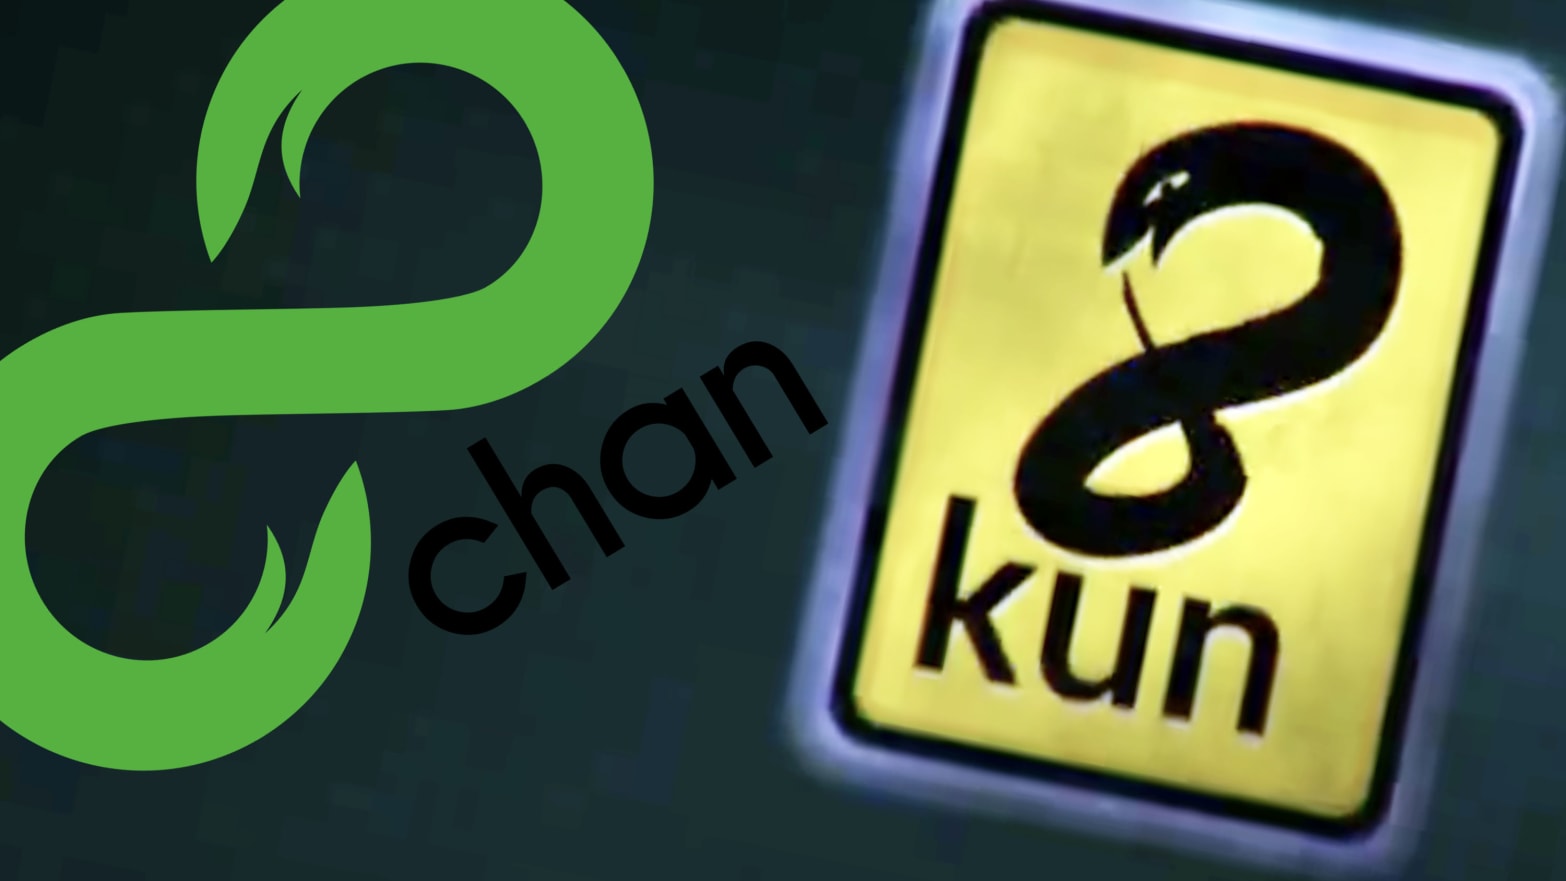 8chan returns to the internet as 8kun - The Verge